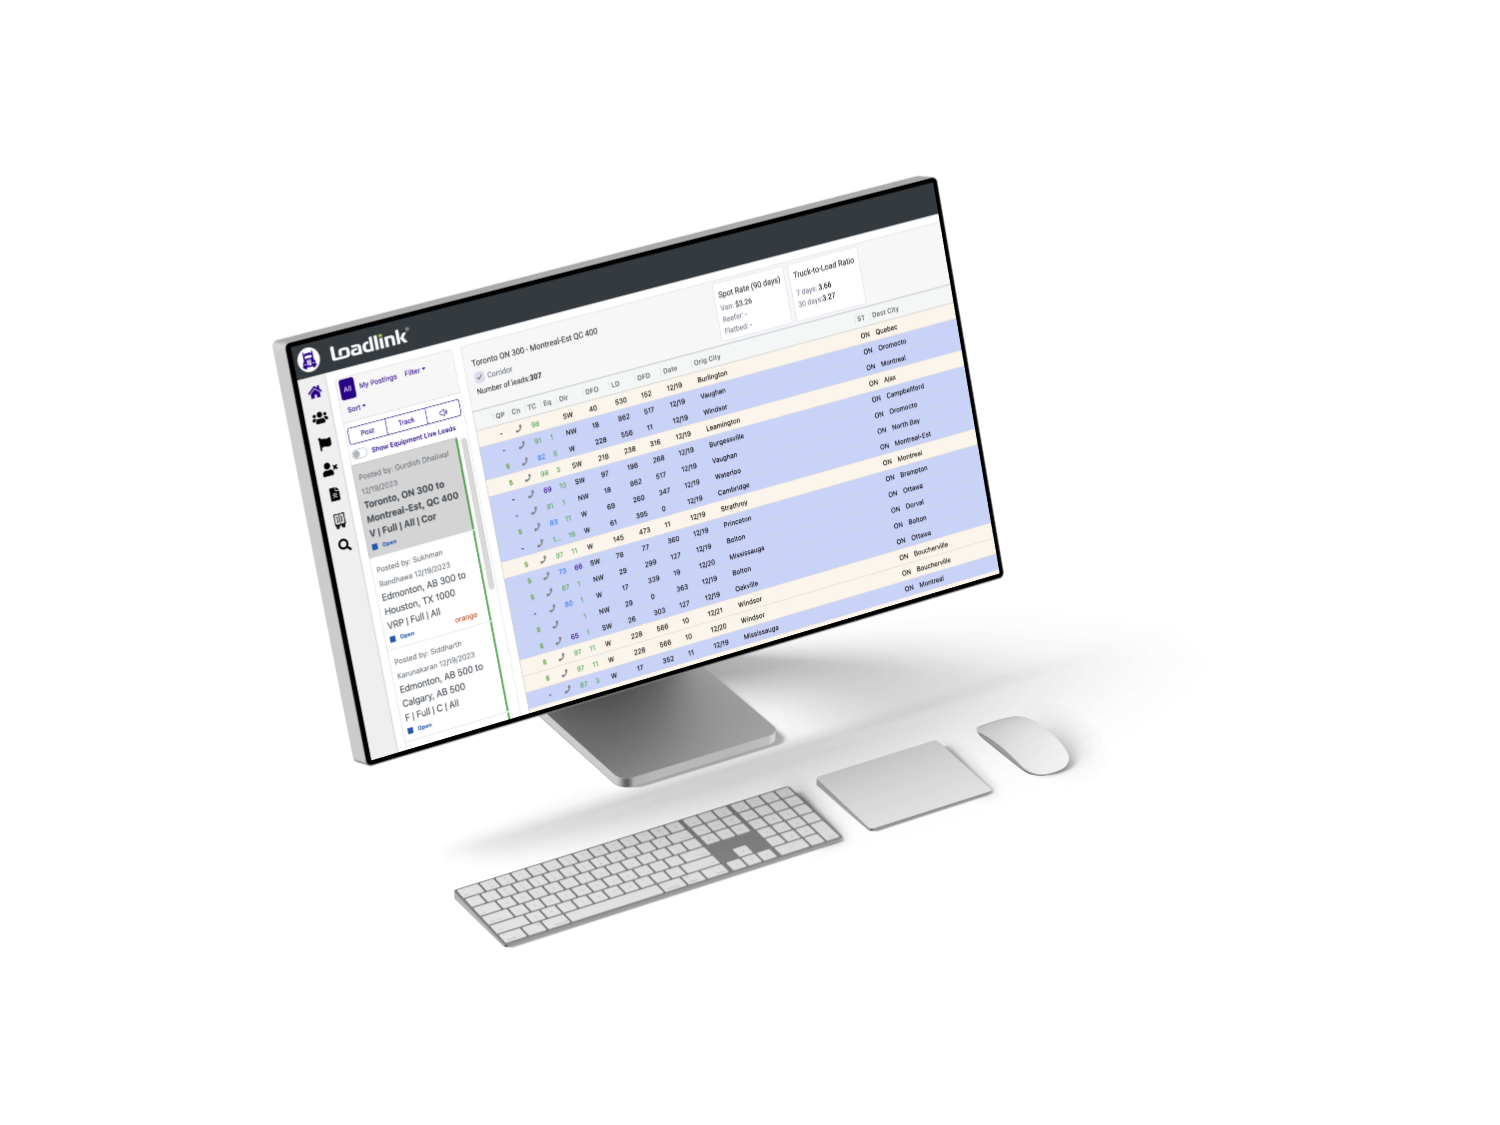 Monitor with LL4 user interface